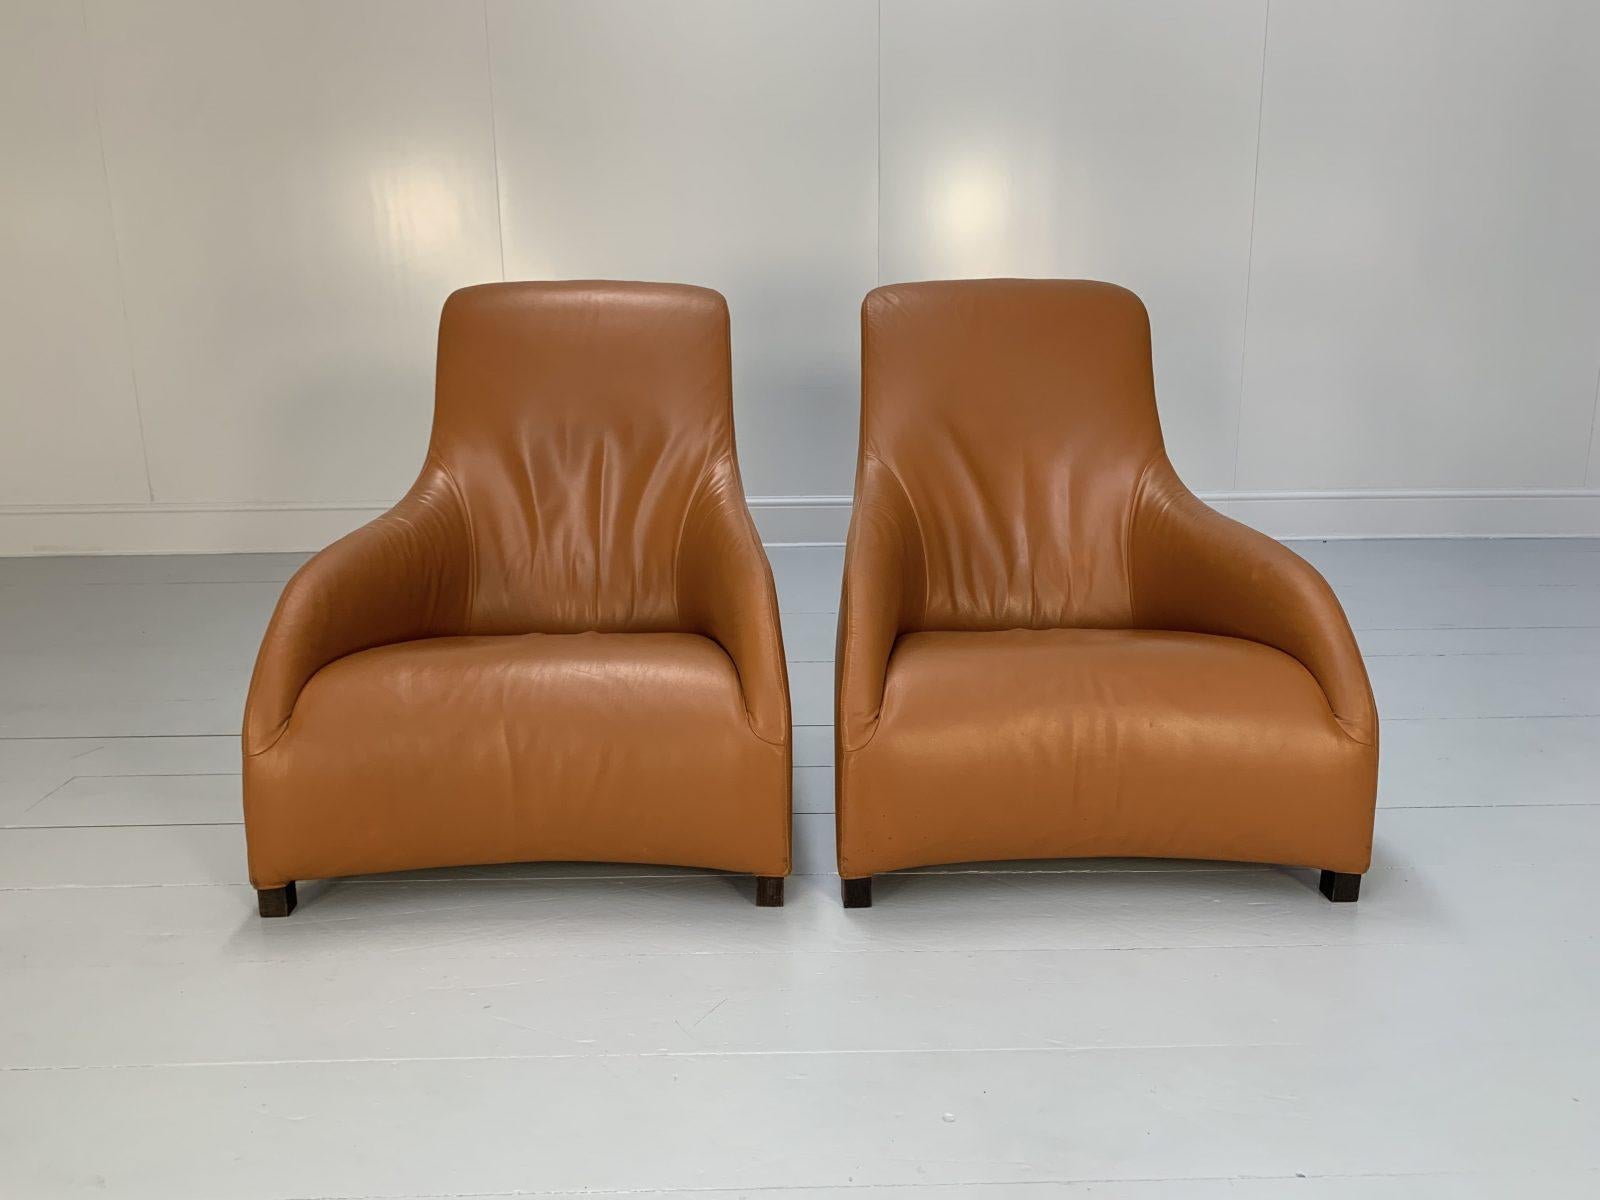 On offer on this occasion is a rare, impeccable identical pair of Maxalto “Kalos 9750_N” Armchairs from the world renown Italian furniture house, B&B Italia.

As you will no doubt be aware by your interest in this Antonio Citterio masterpiece, B&B